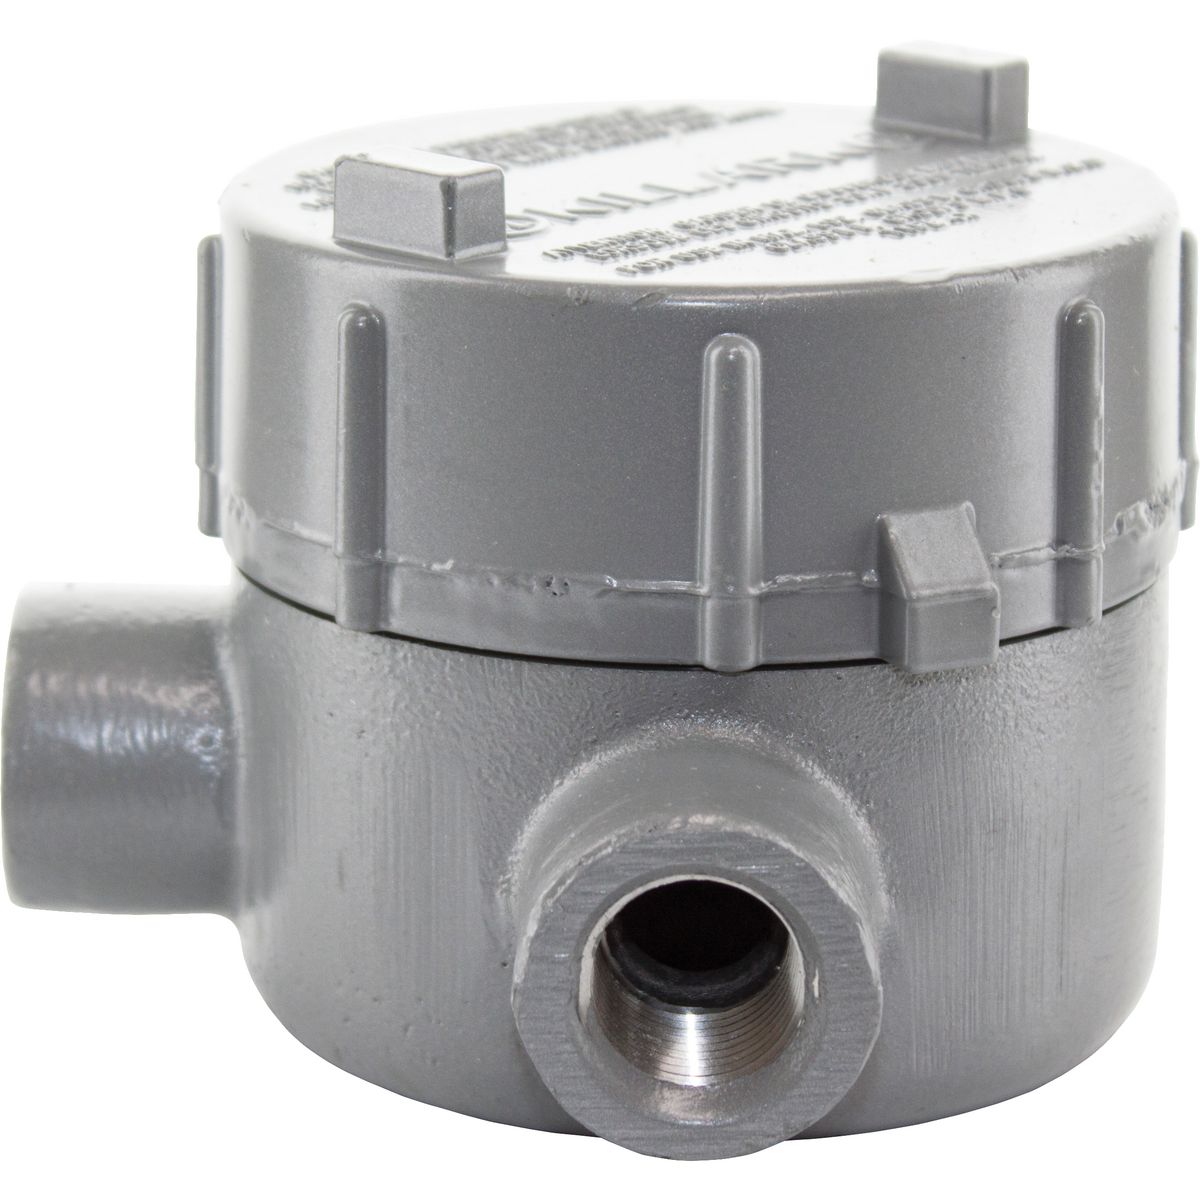 GEC SERIES FITTINGS - IRON - L TYPE OUTLET BODY - HUB SIZE 3/4 IN -VOLUME 18.0 CU IN